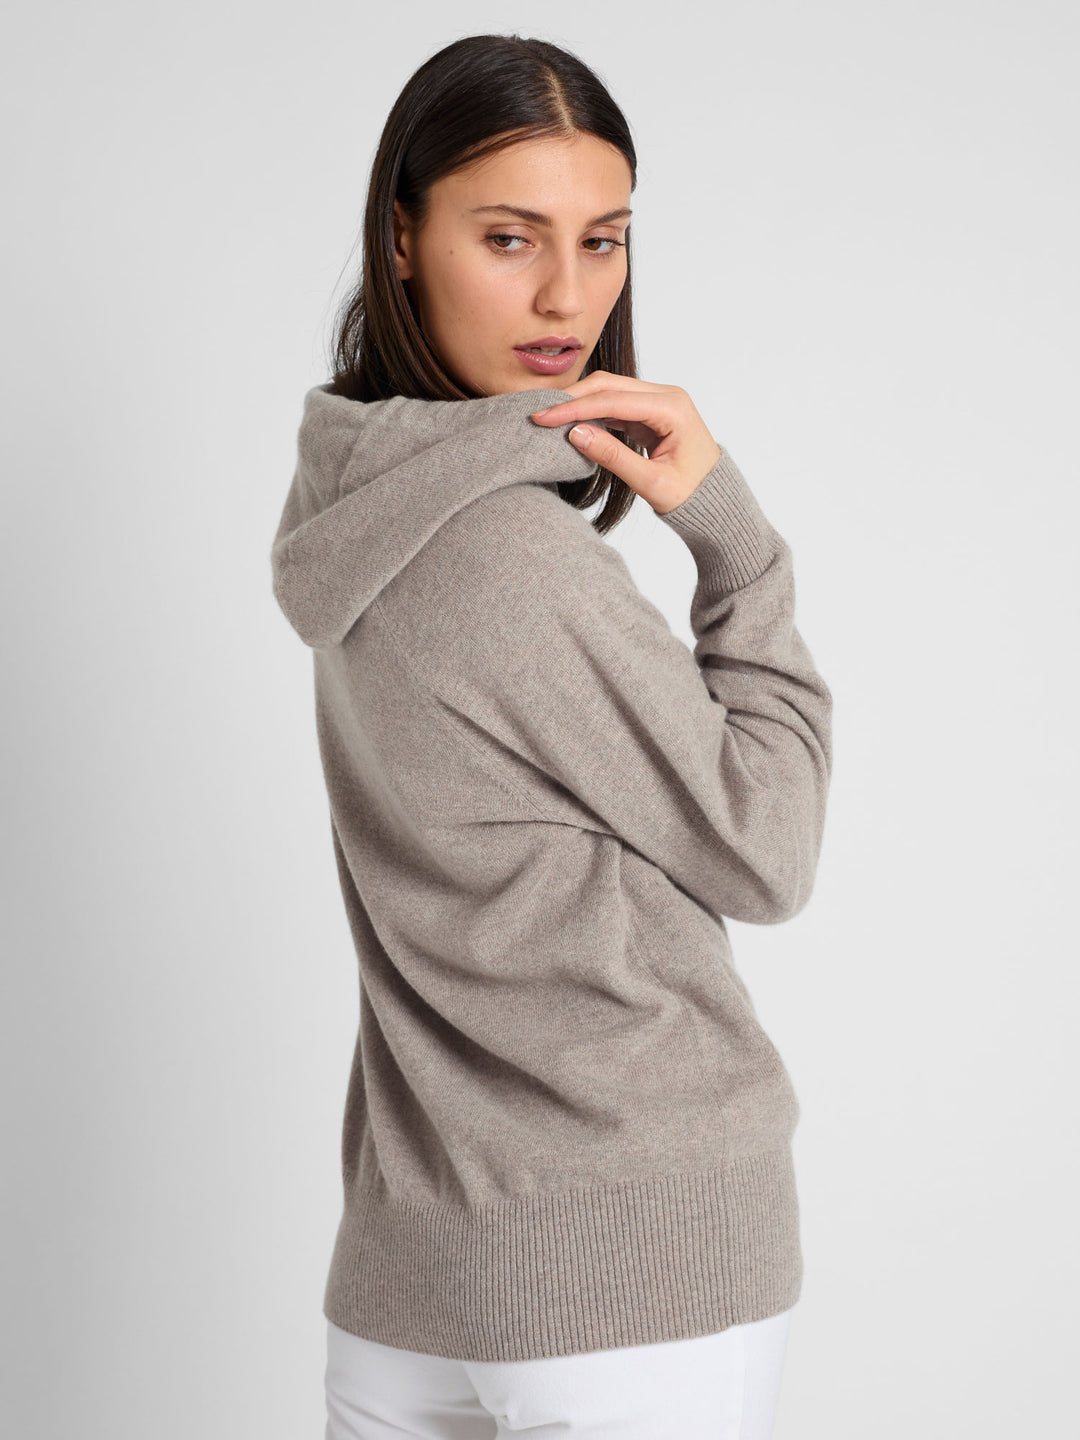 Cashmere hoodie "Lux Hoodie" in 100% pure cashmere. Scandinavian design by Kashmina. Color: Toast.